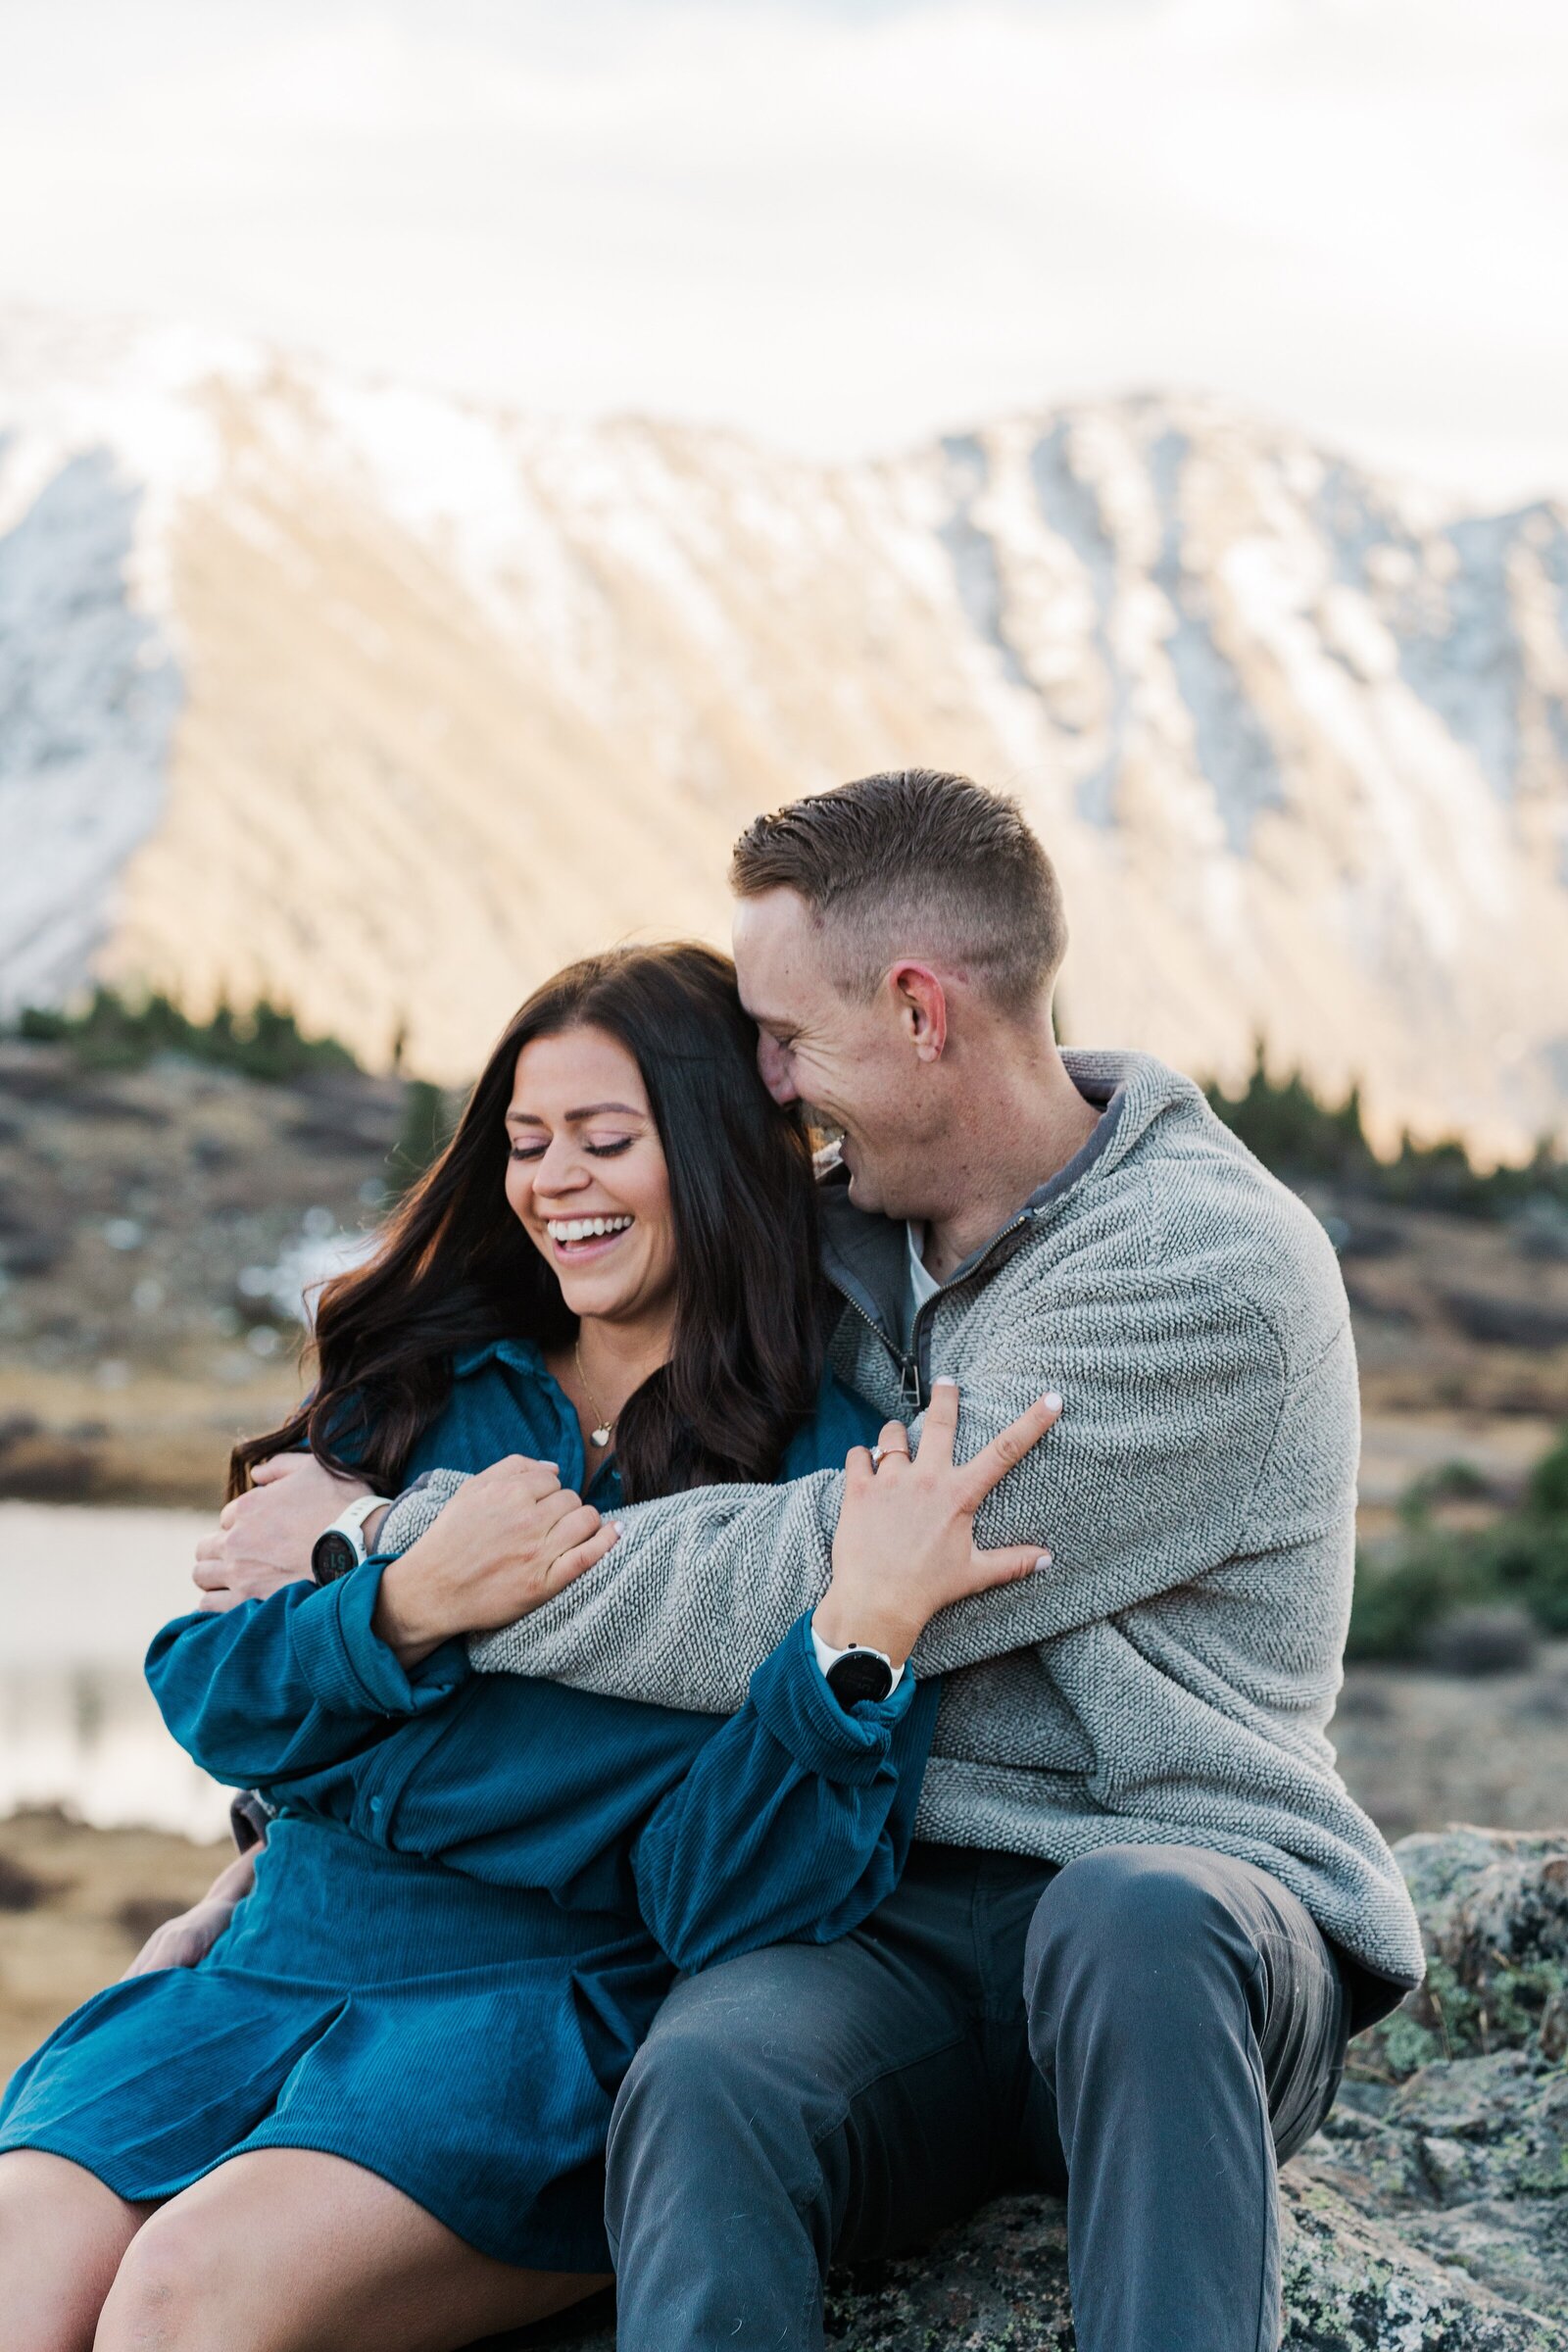 This candid photo session in the great outdoors perfectly captures the story and love of this Colorado couple, told through documentary-style photography.